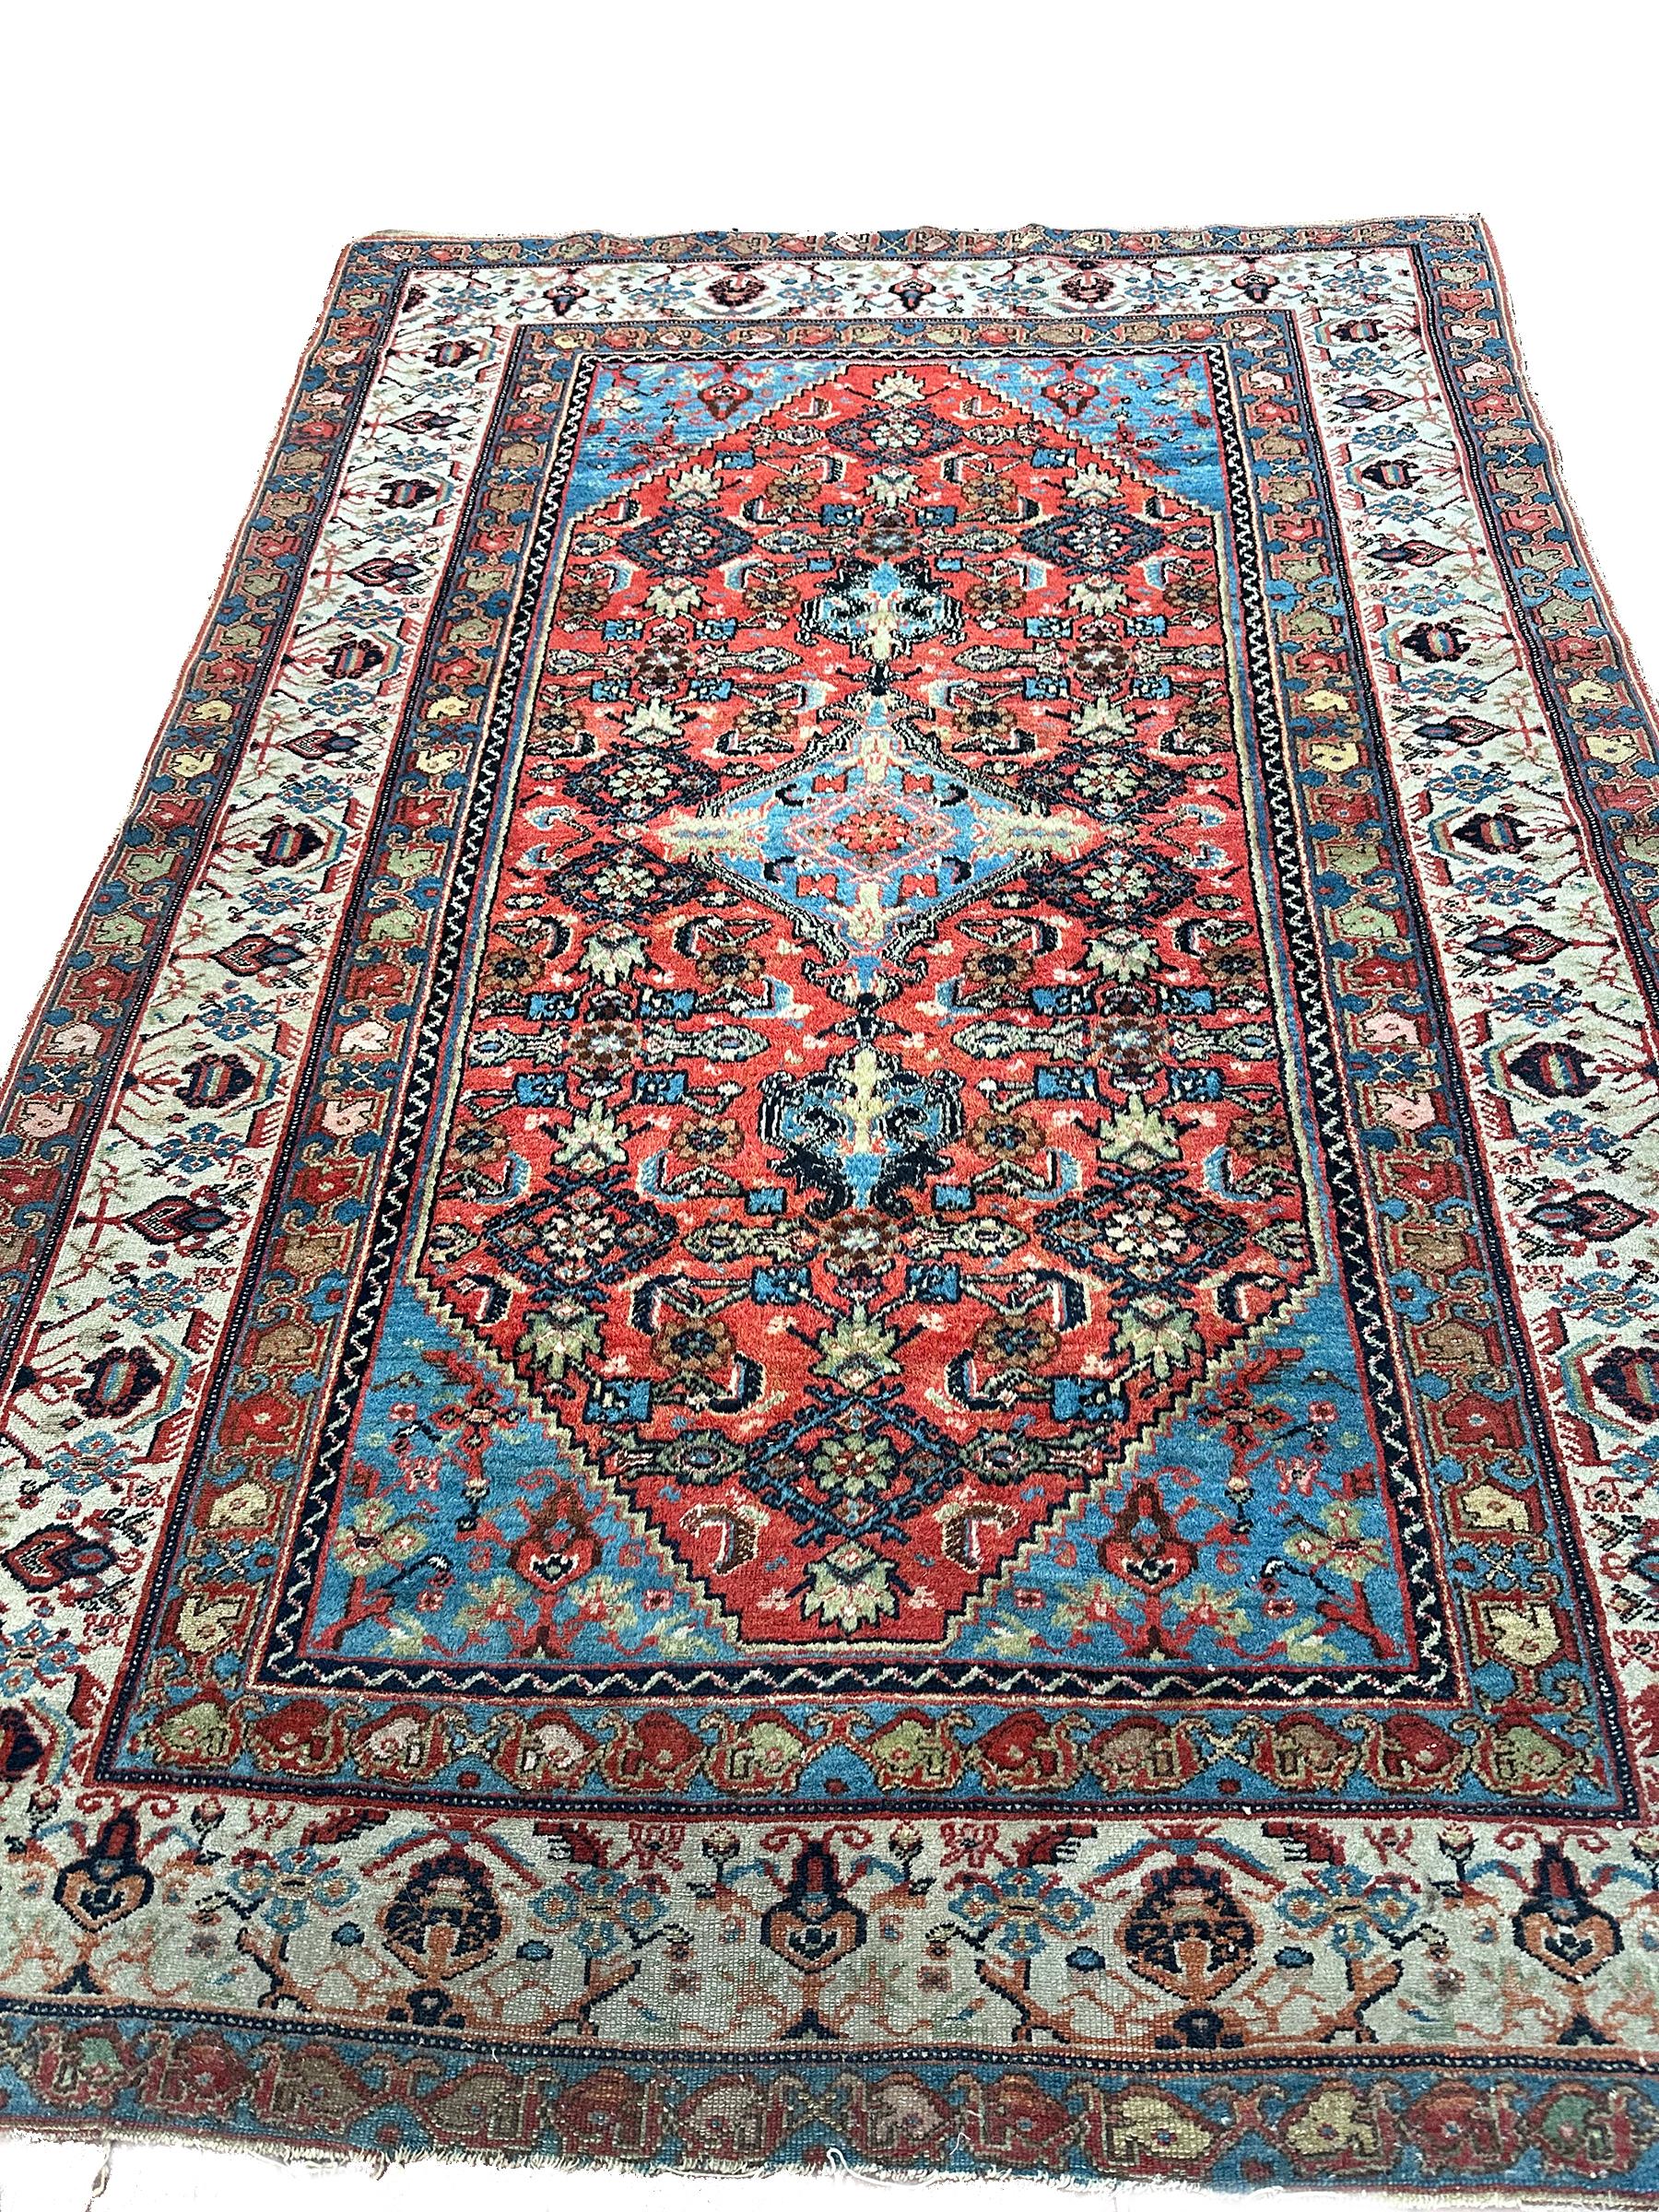 1890 Antique Traditional Oriental Rug Exceptionally fine Rug 5x6

4'5